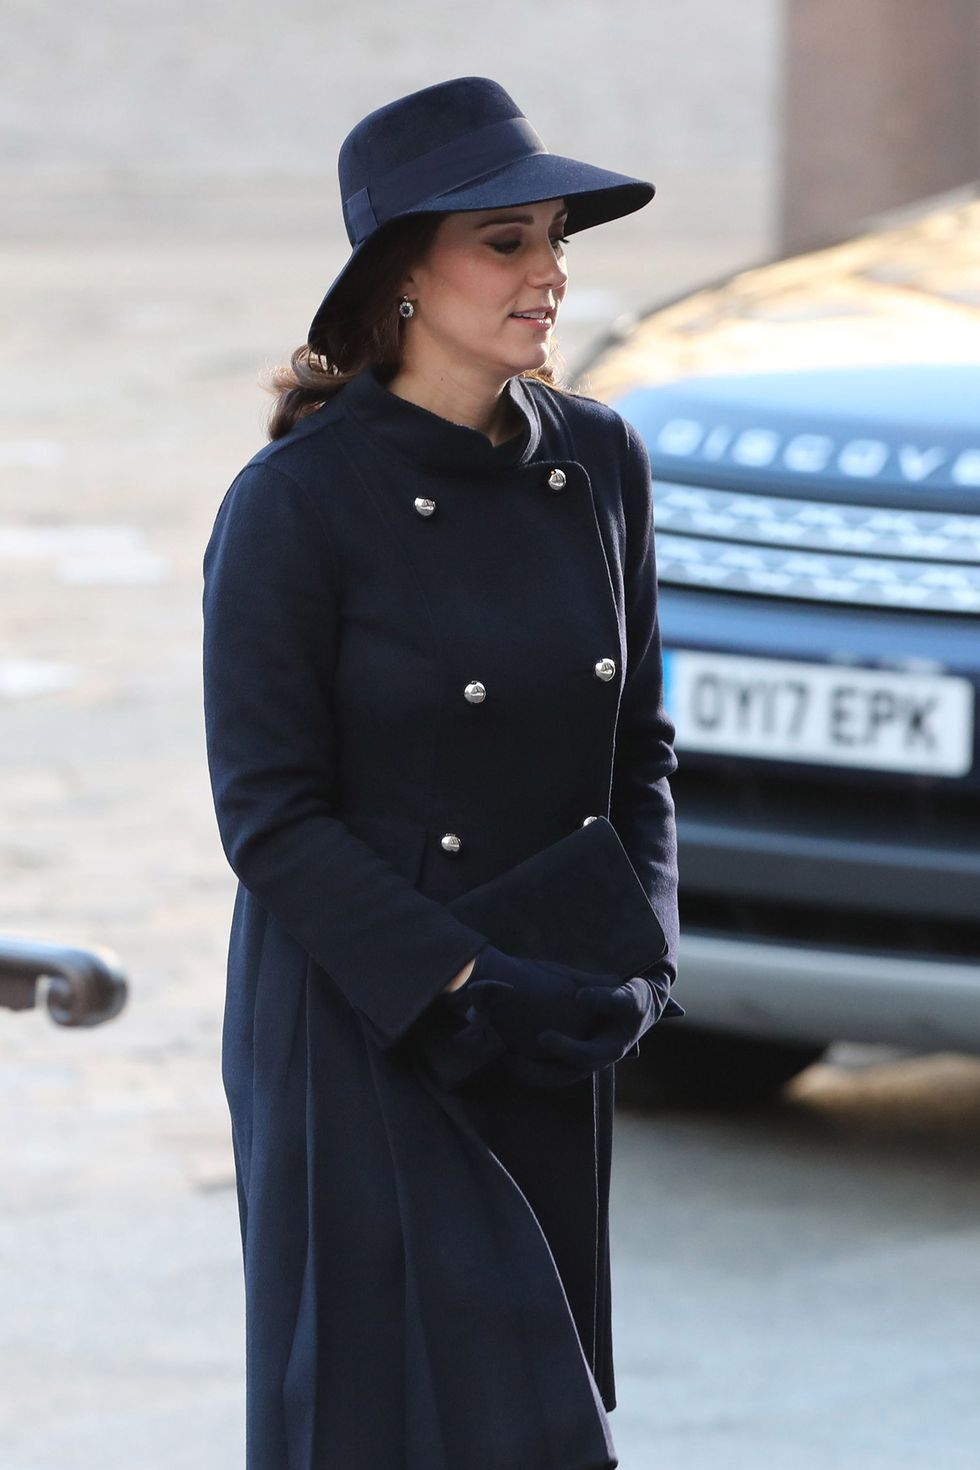 19-arrives-at-st-paul-s-cathedral-for-a-grenfell-tower-national-memorial-service-on-december-14-2017-in-london-england-1523224512.jpg